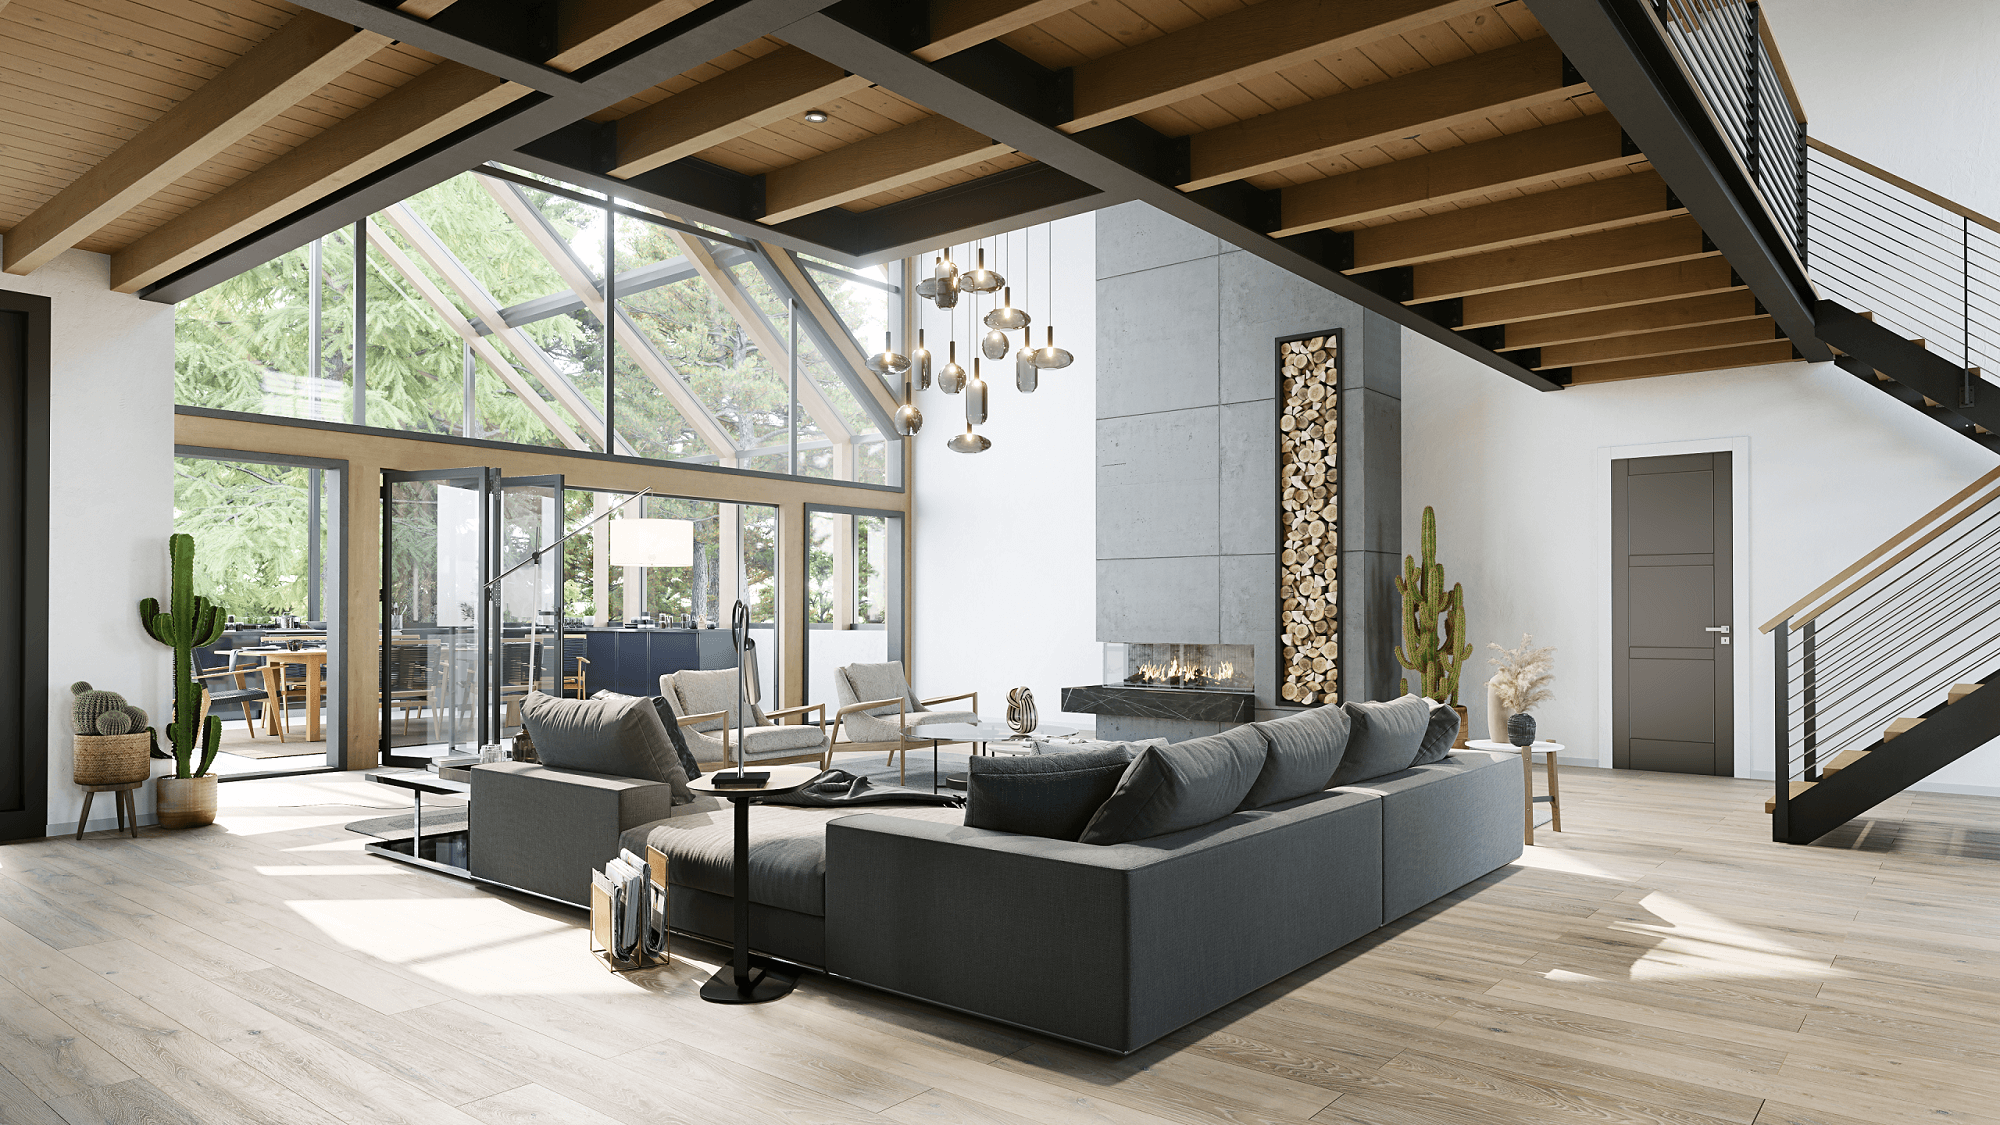 Photorealistic Rendering for a Living Room